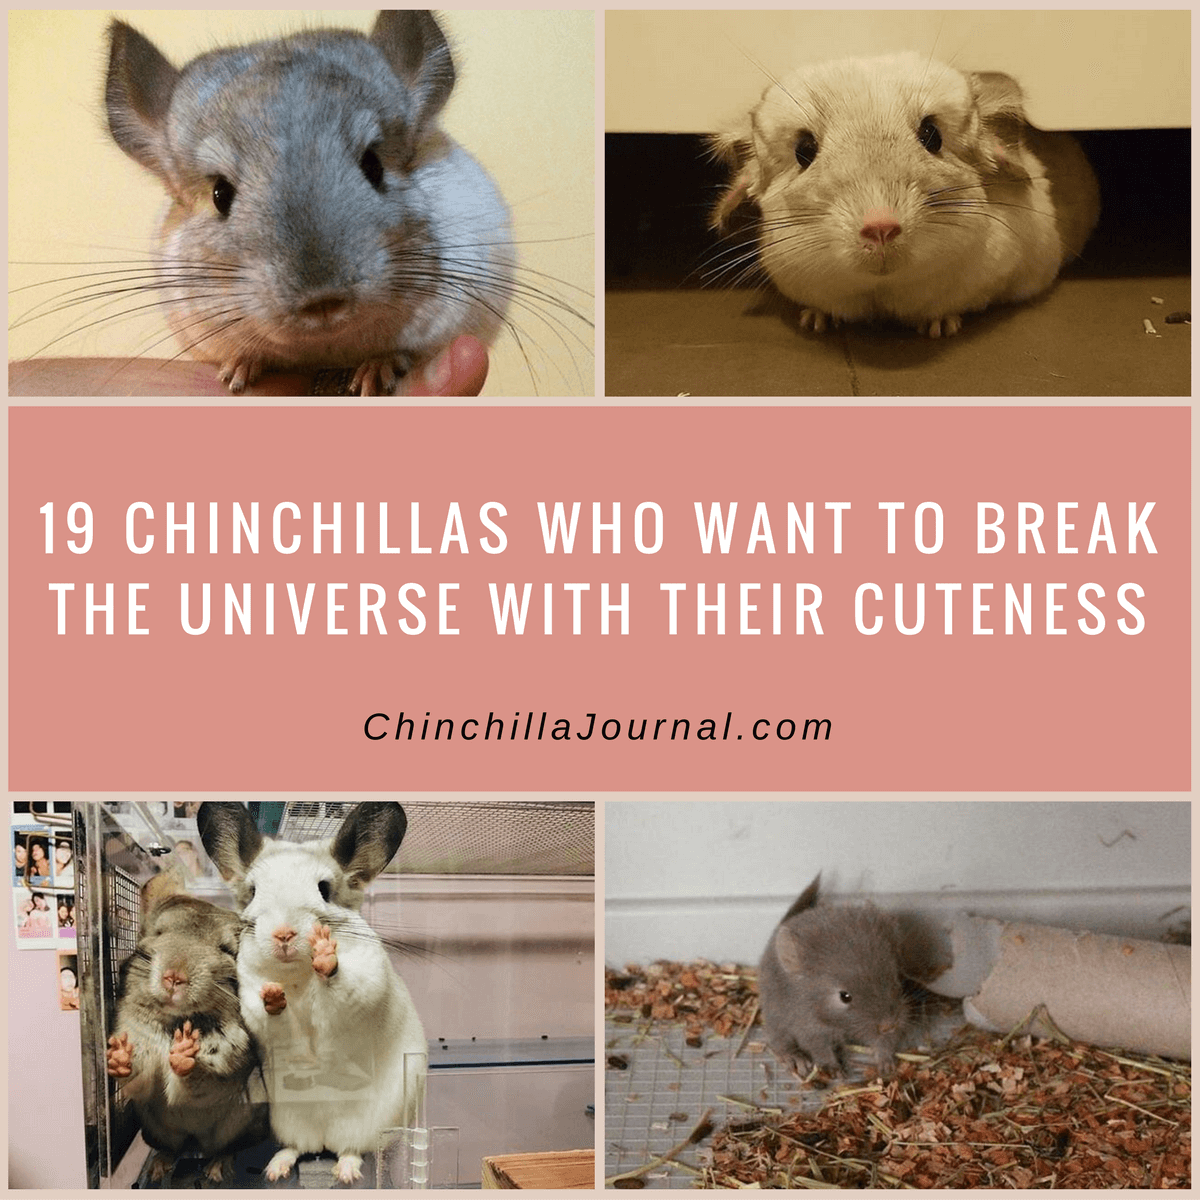 19 Chinchillas Who Want To Break The Universe With Their Cuteness